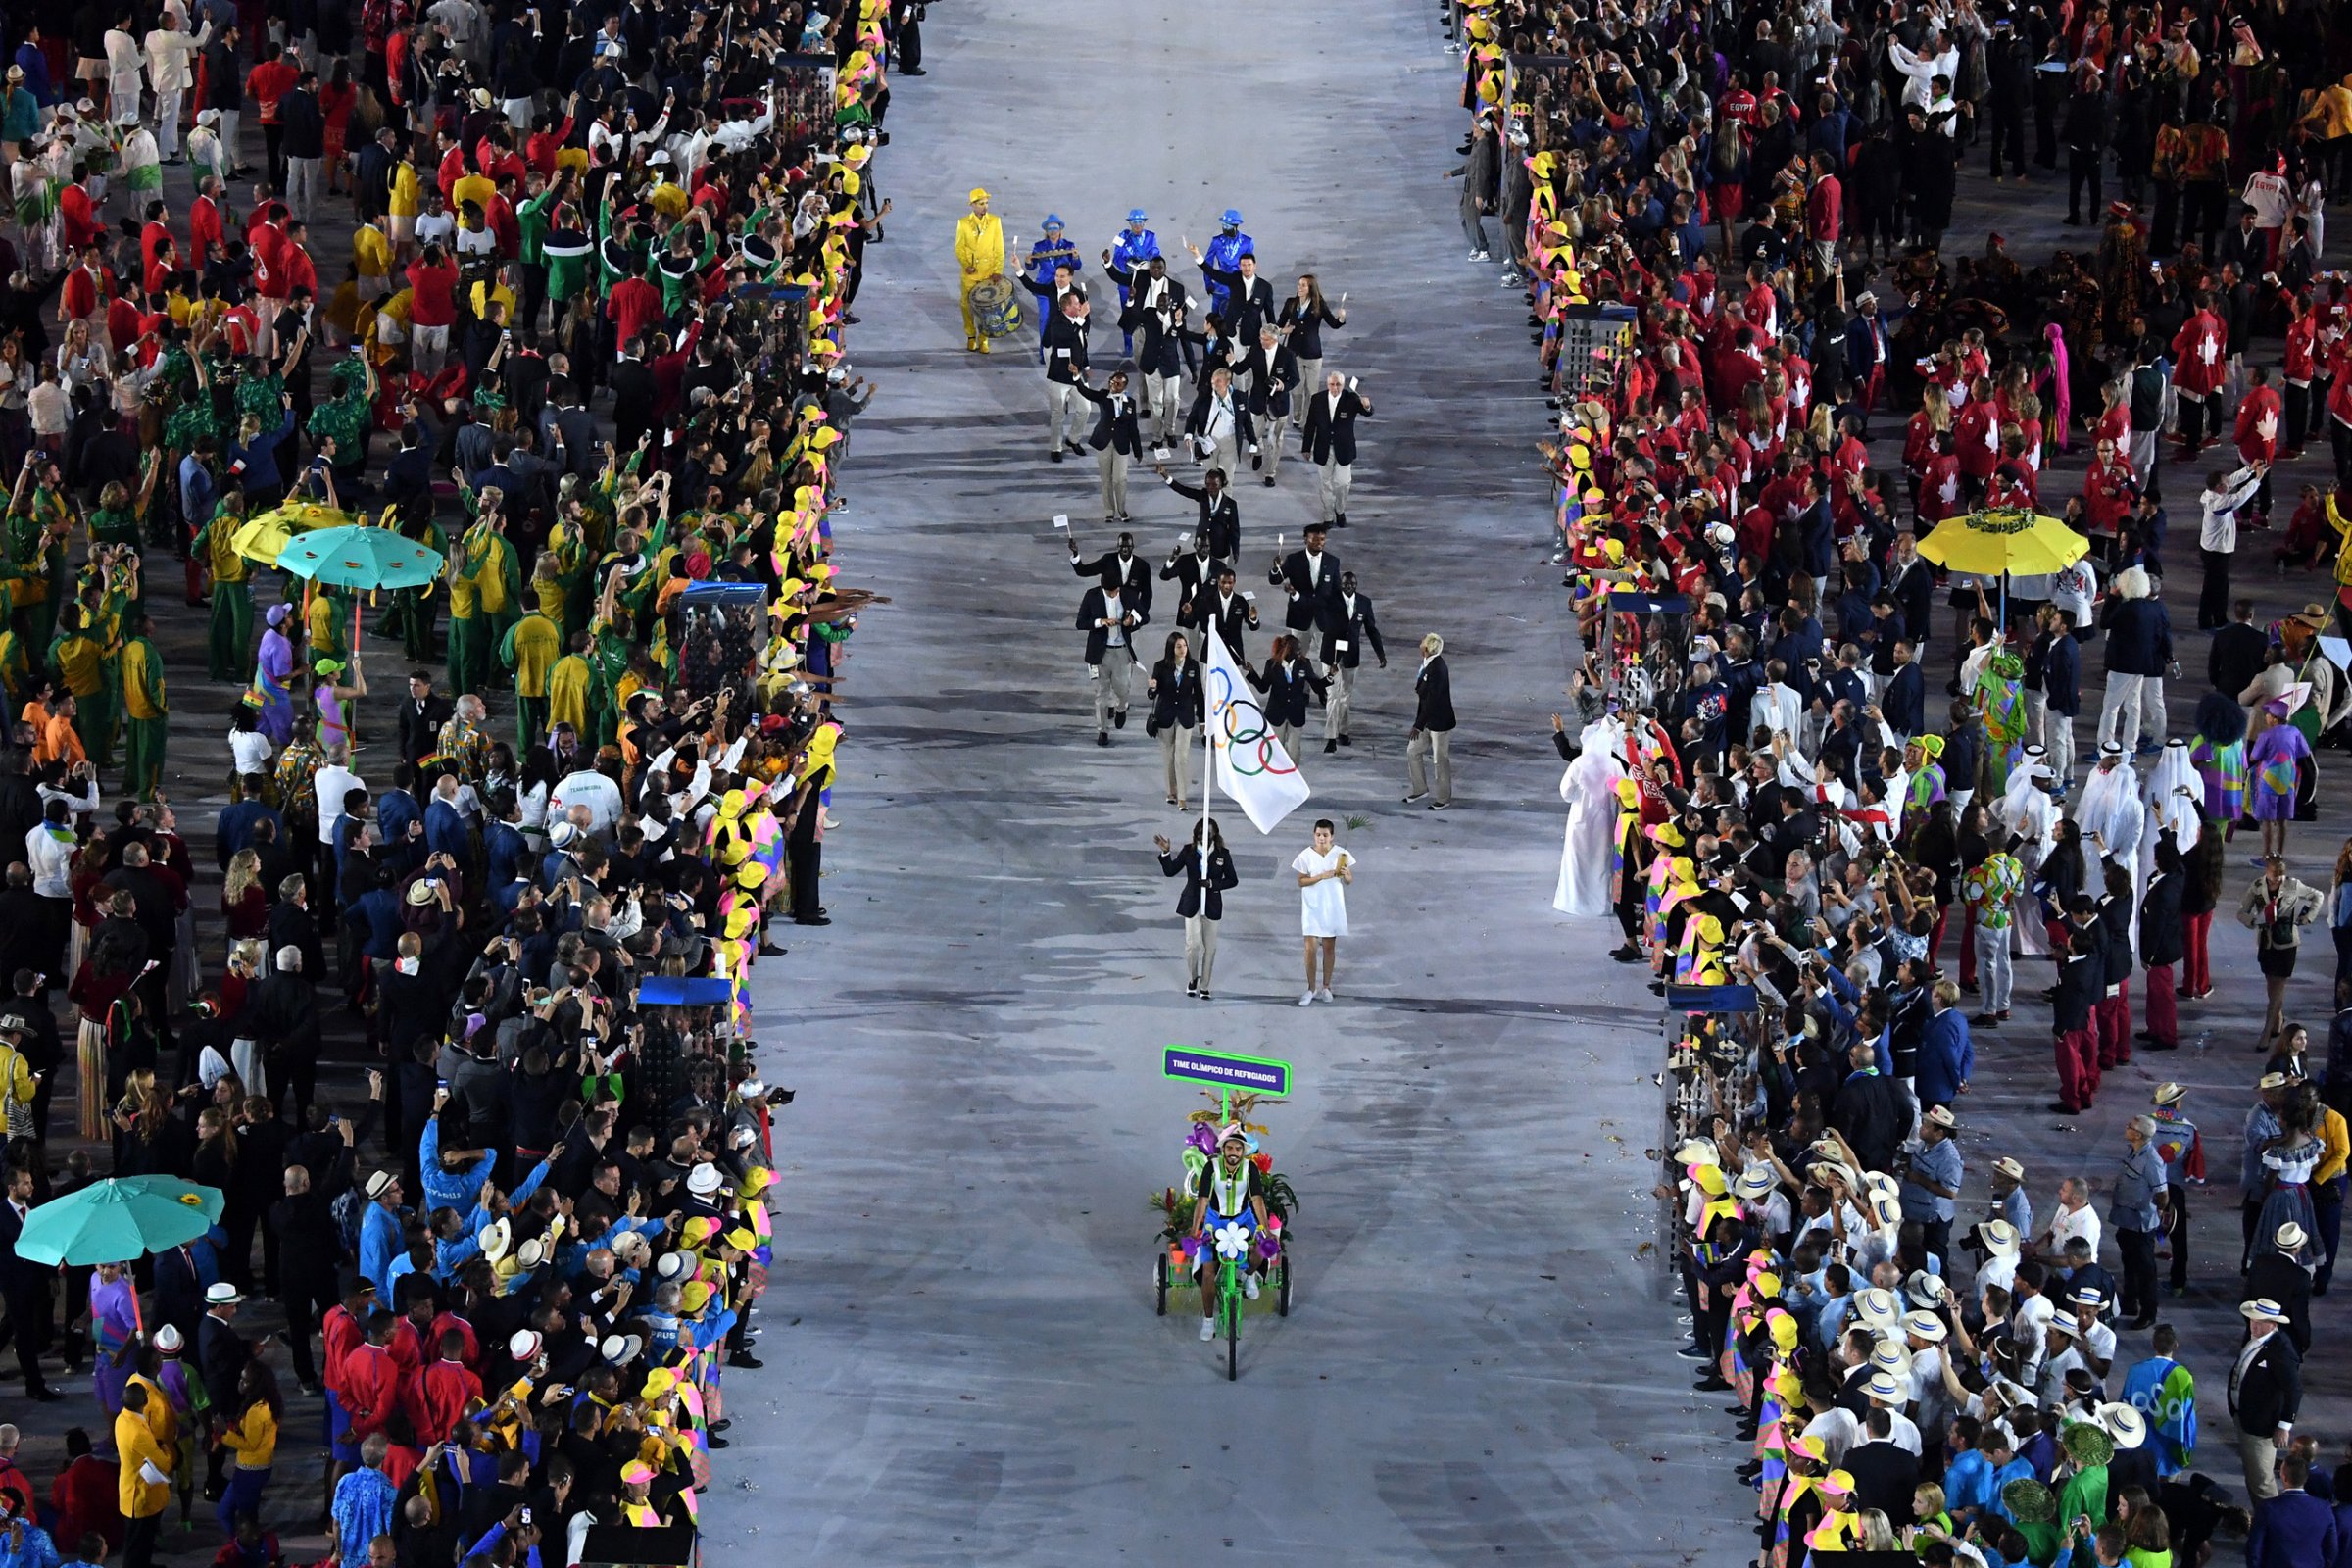 The Olympic Refugee team enter the atheletes parade during the Opening Ceremony of the Rio 2016 Olympic Games at Maracana Stadium in Rio de Janeiro on August 5, 2016.